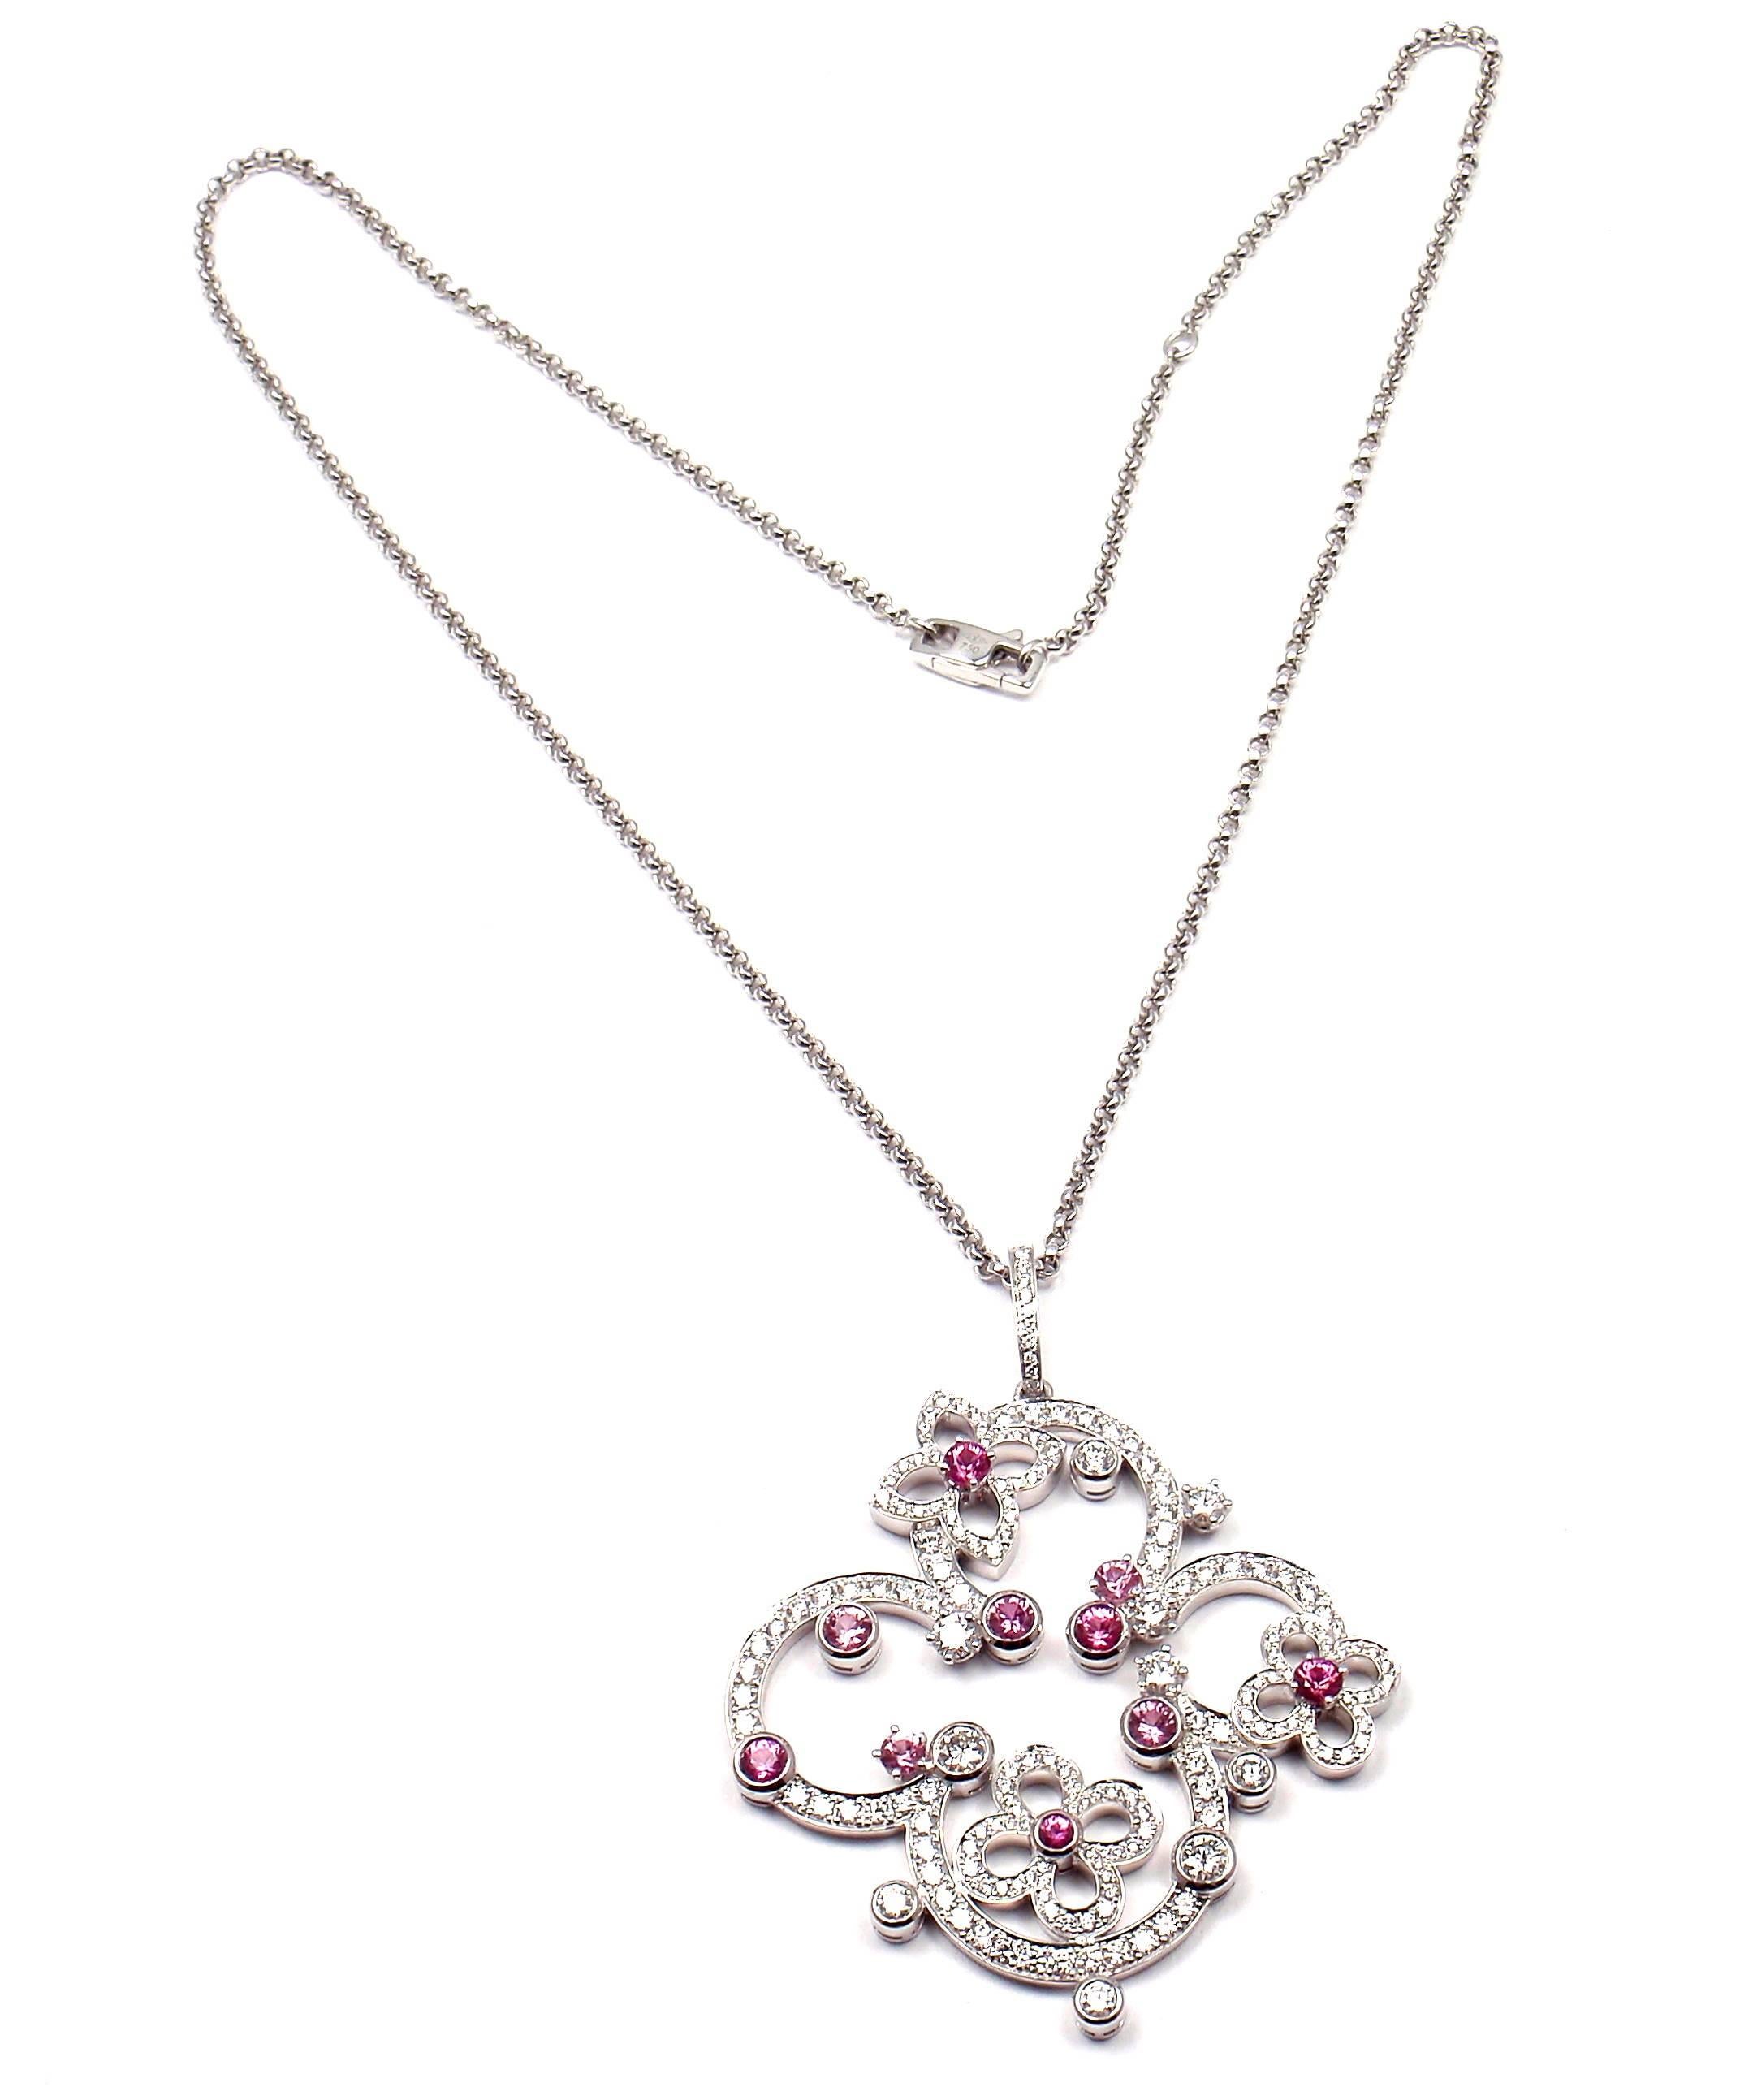 louis vuitton pink sapphire and diamond necklace price